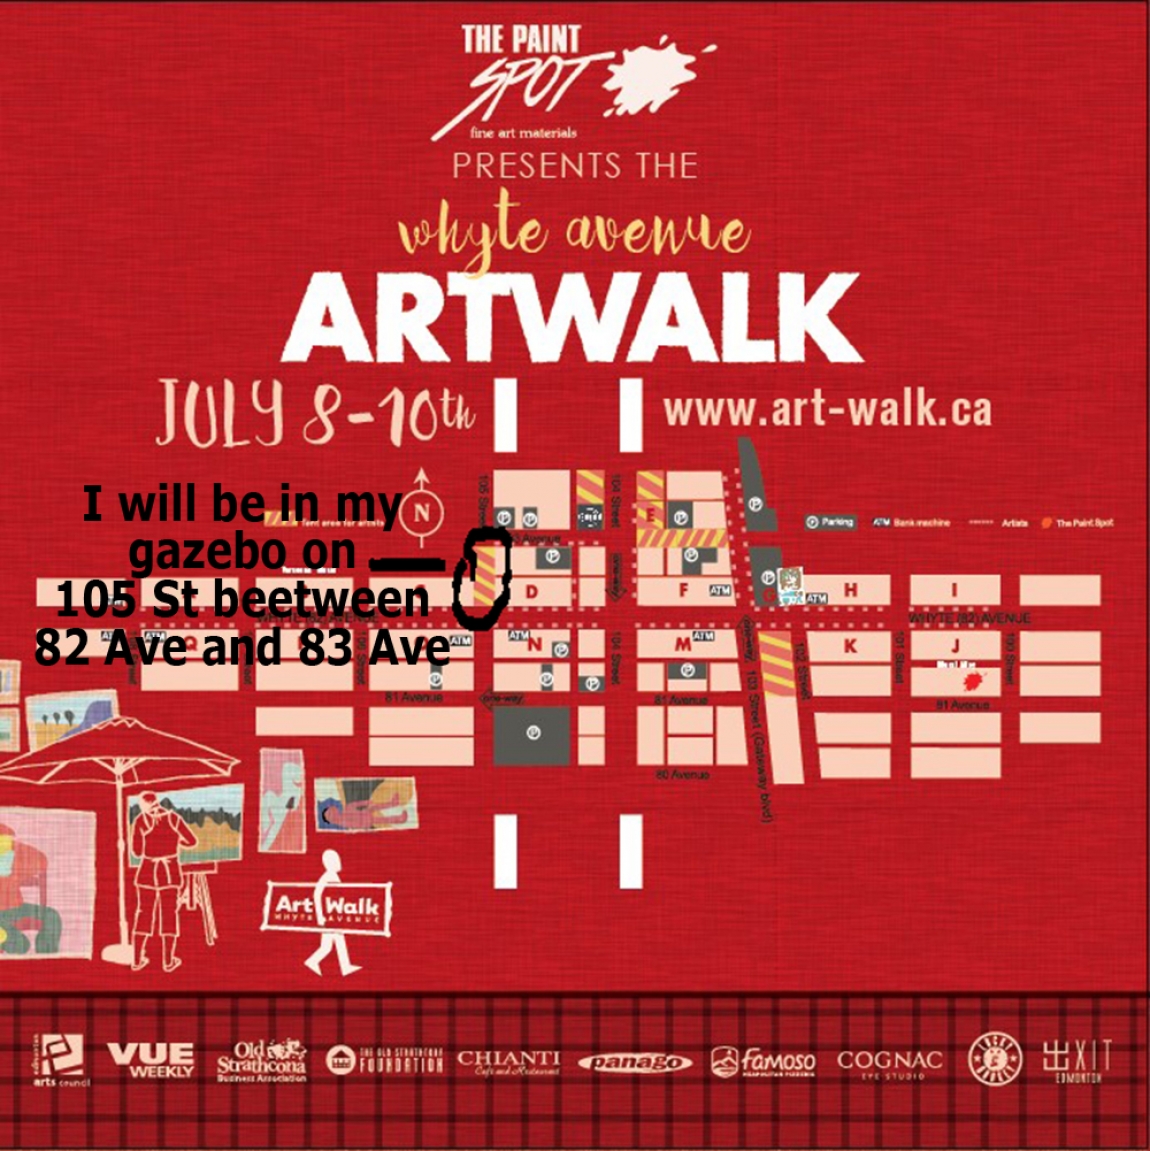 My Art Walk location on 105 St between 82 Ave and 83Ave